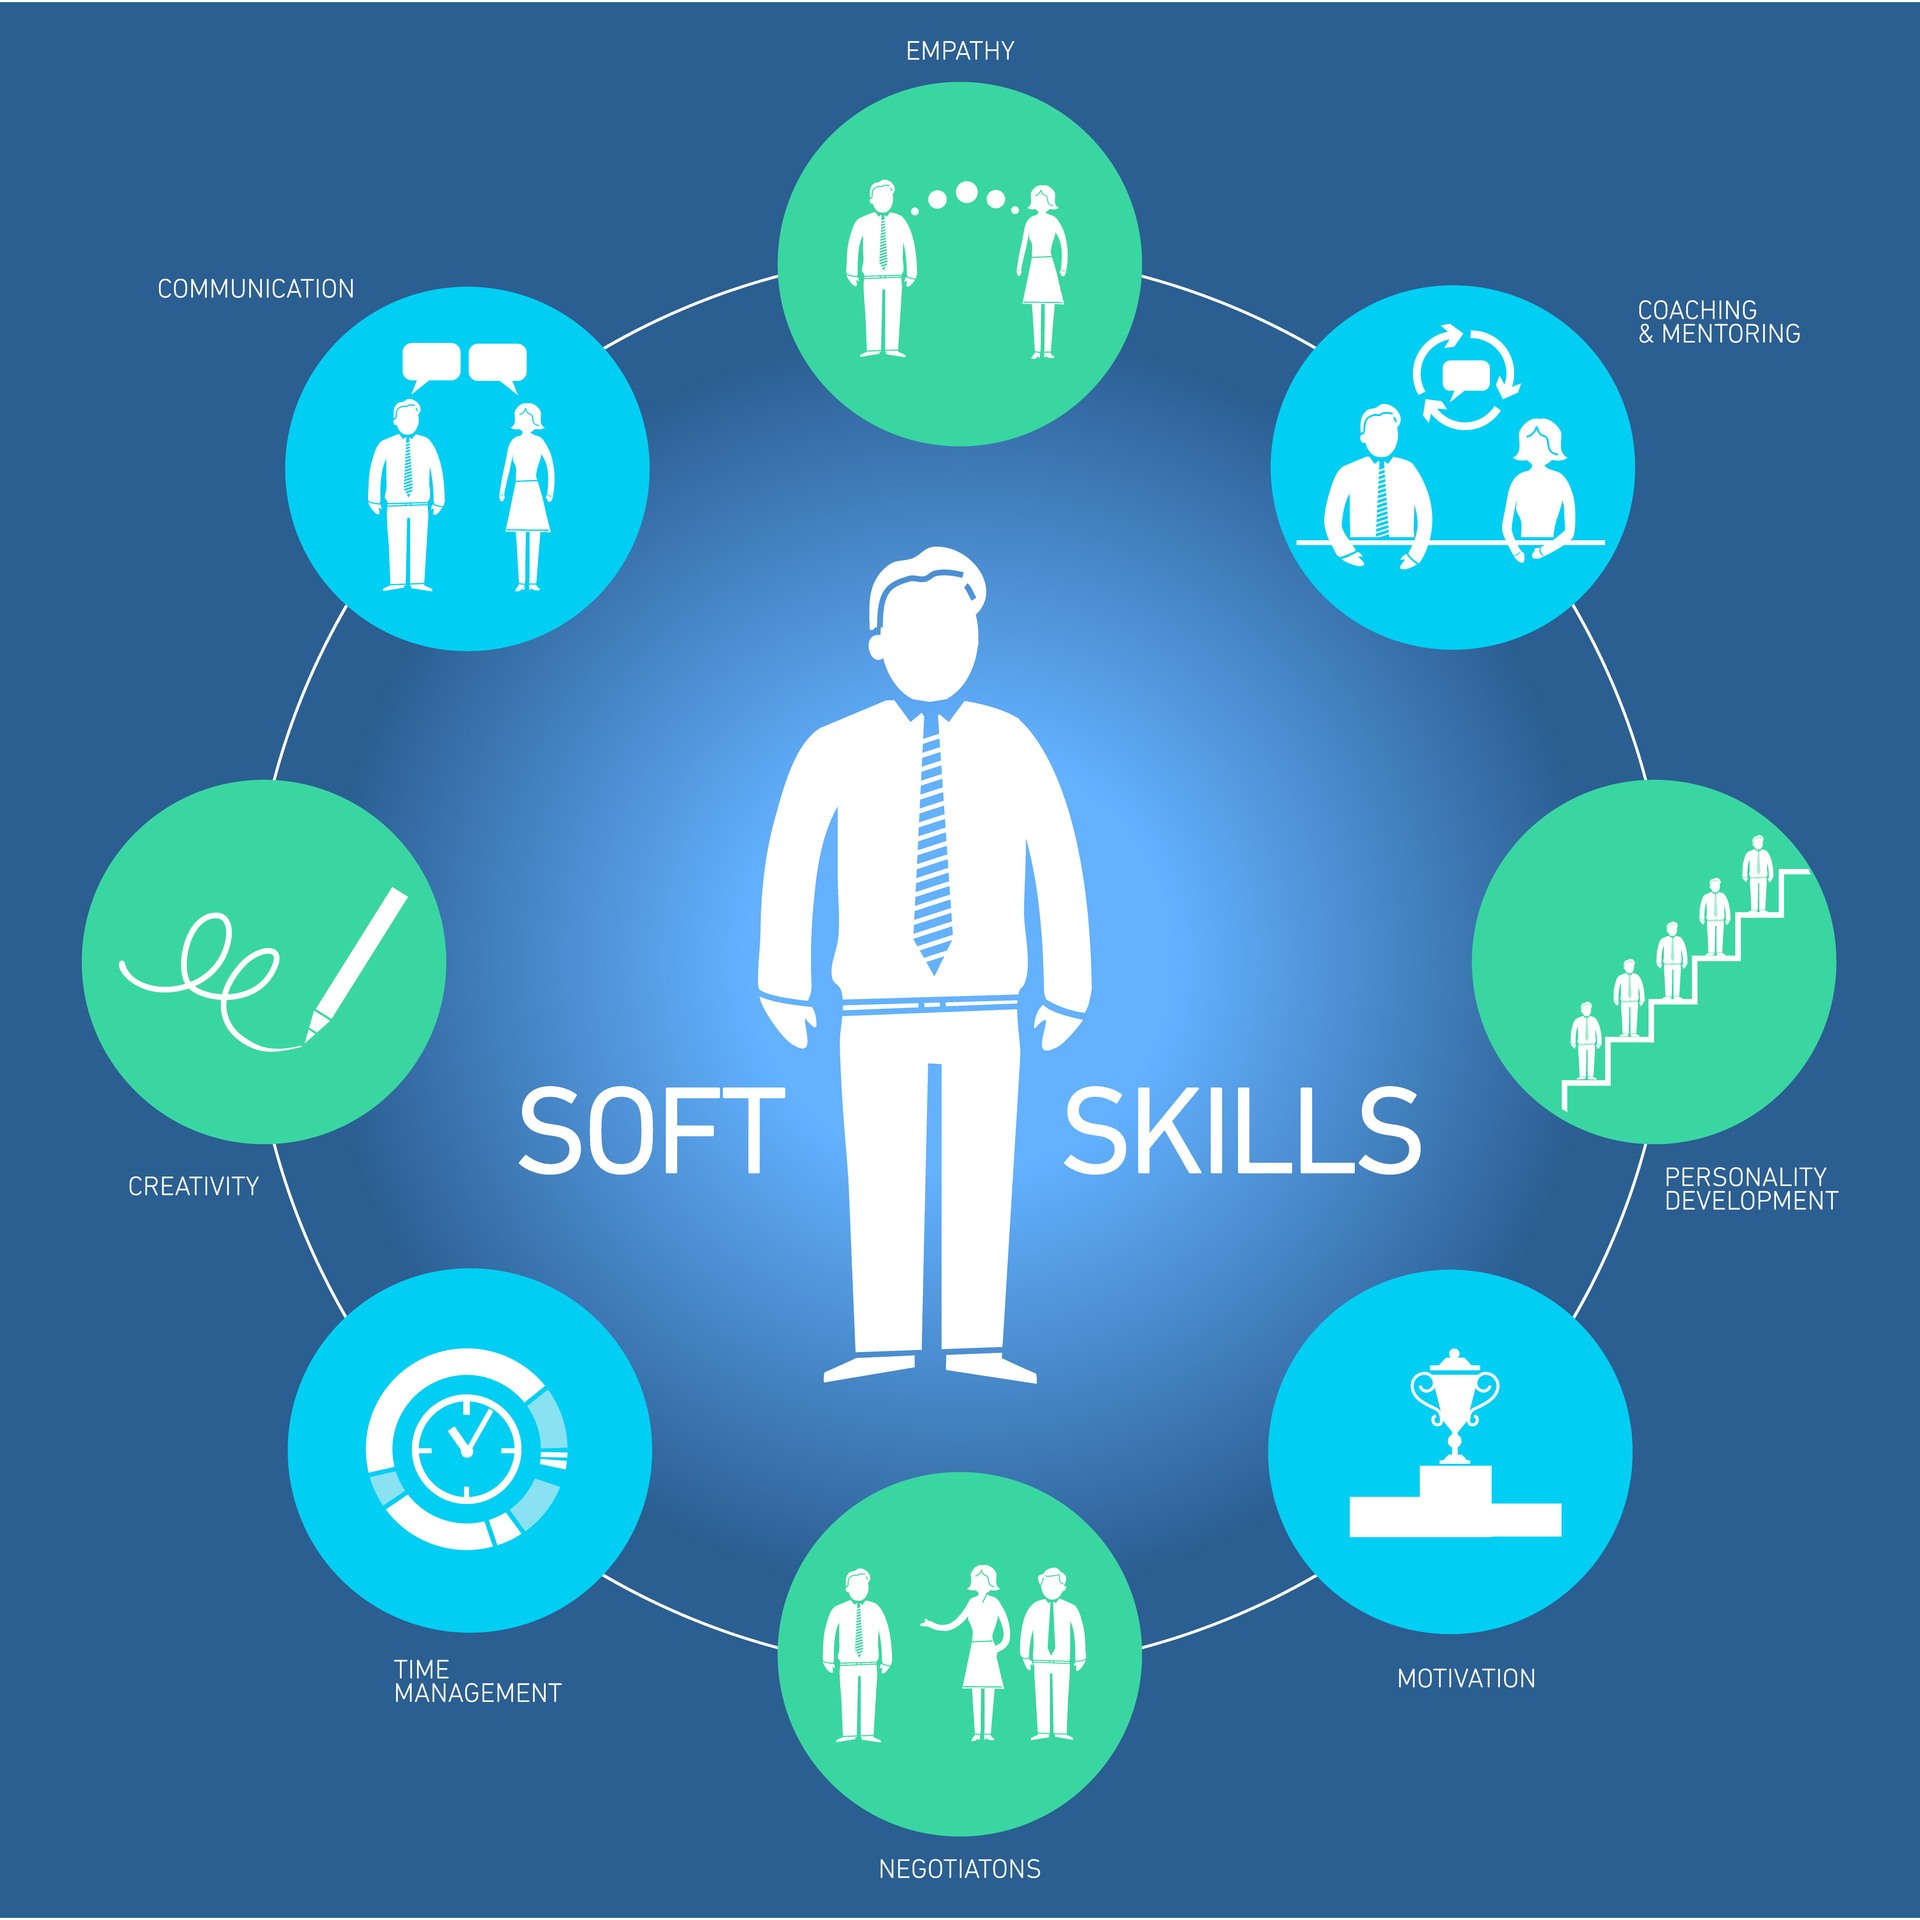 Why Soft Skills Are Key To EVERYONE’s Employability And Career Progression